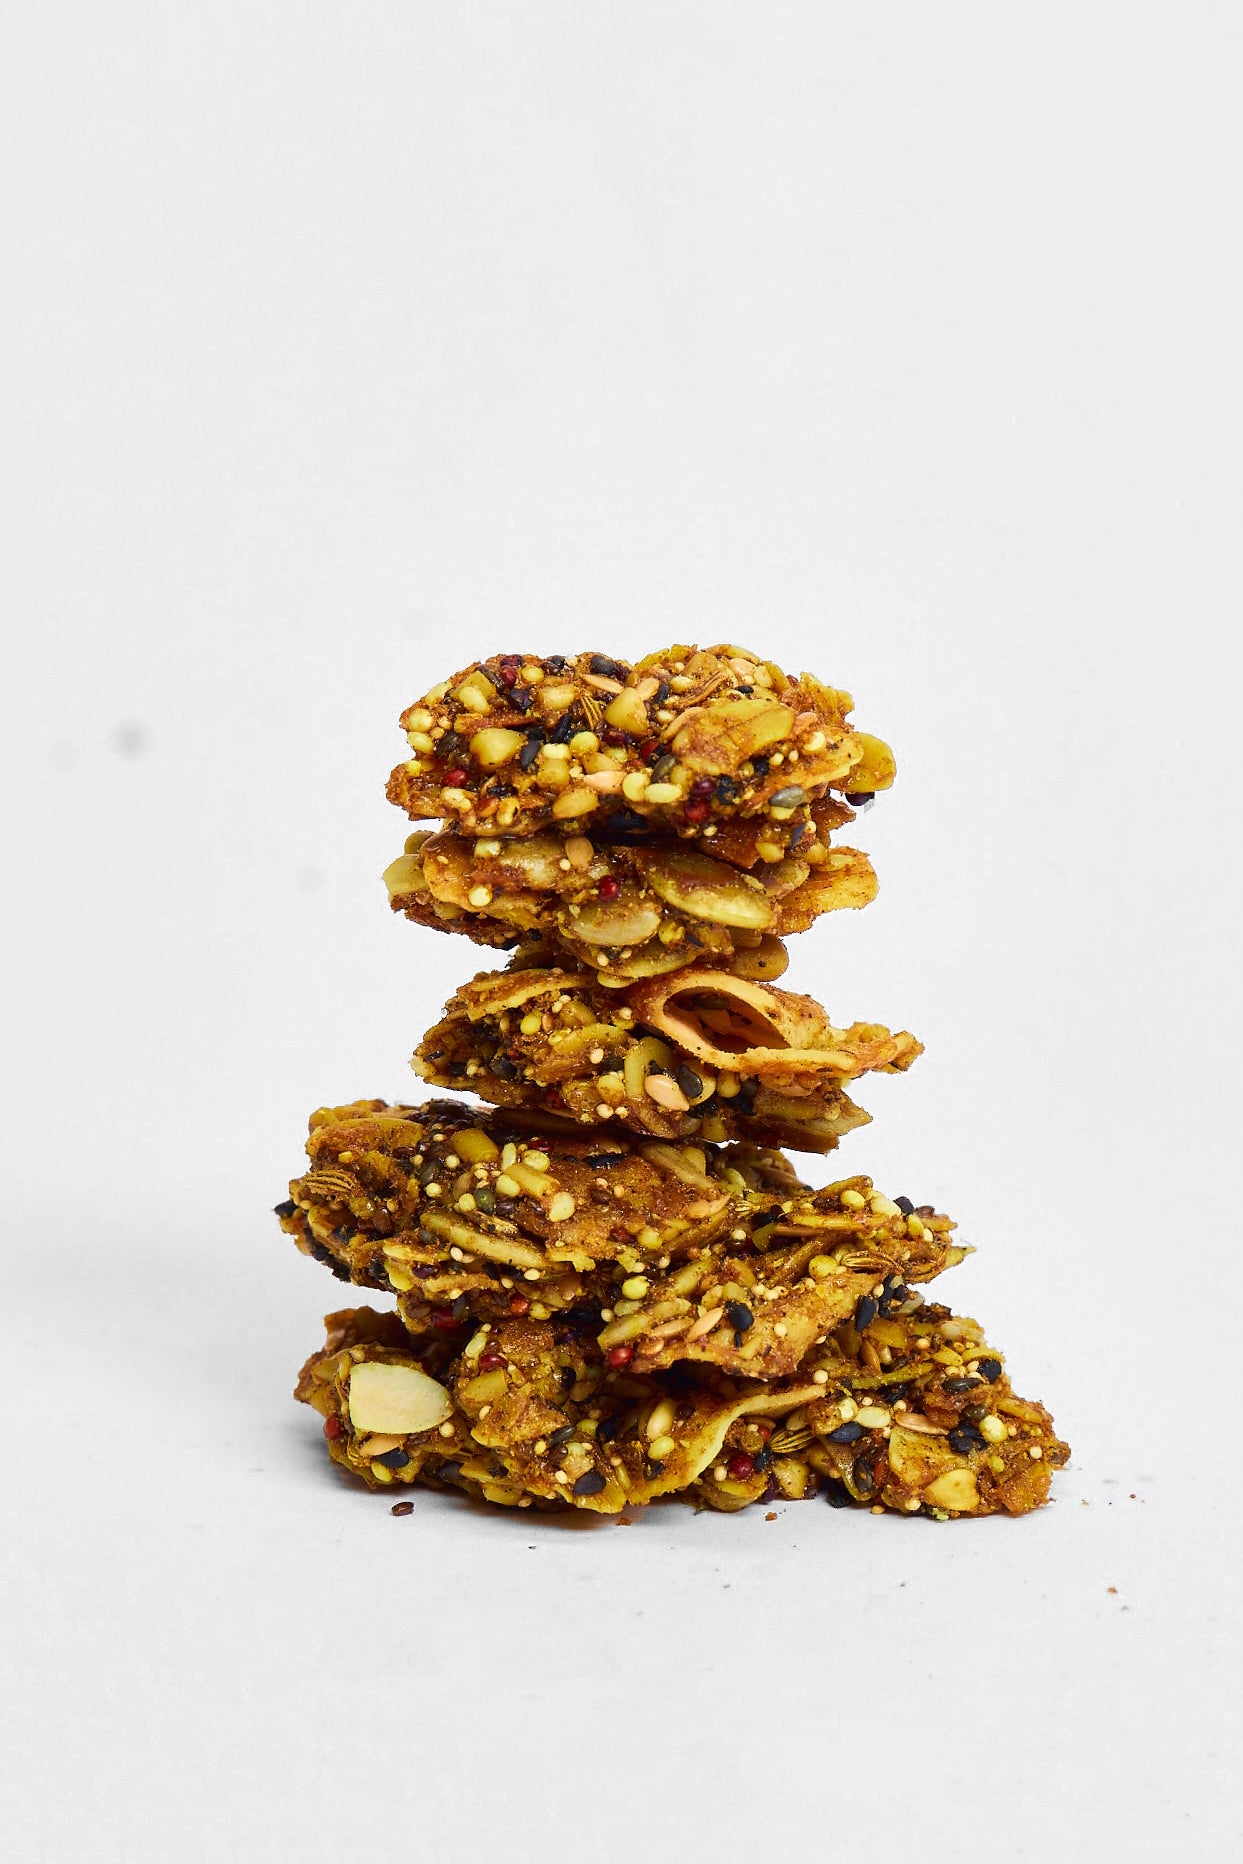 Turmeric & Super Seed Granola: 3oz by Sweet Deliverance